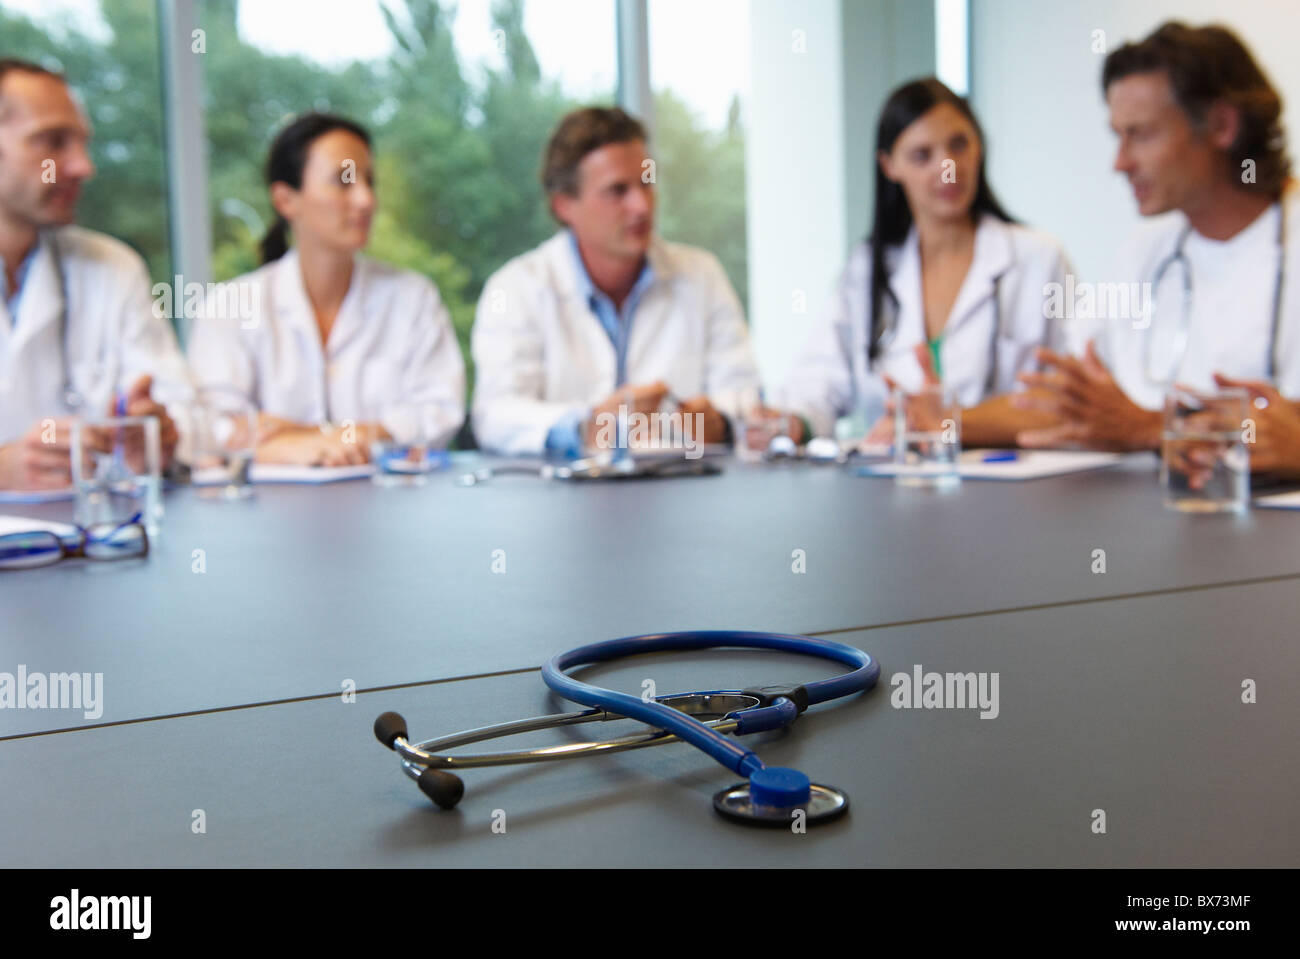 Doctors meeting, stethoscope on table Stock Photo